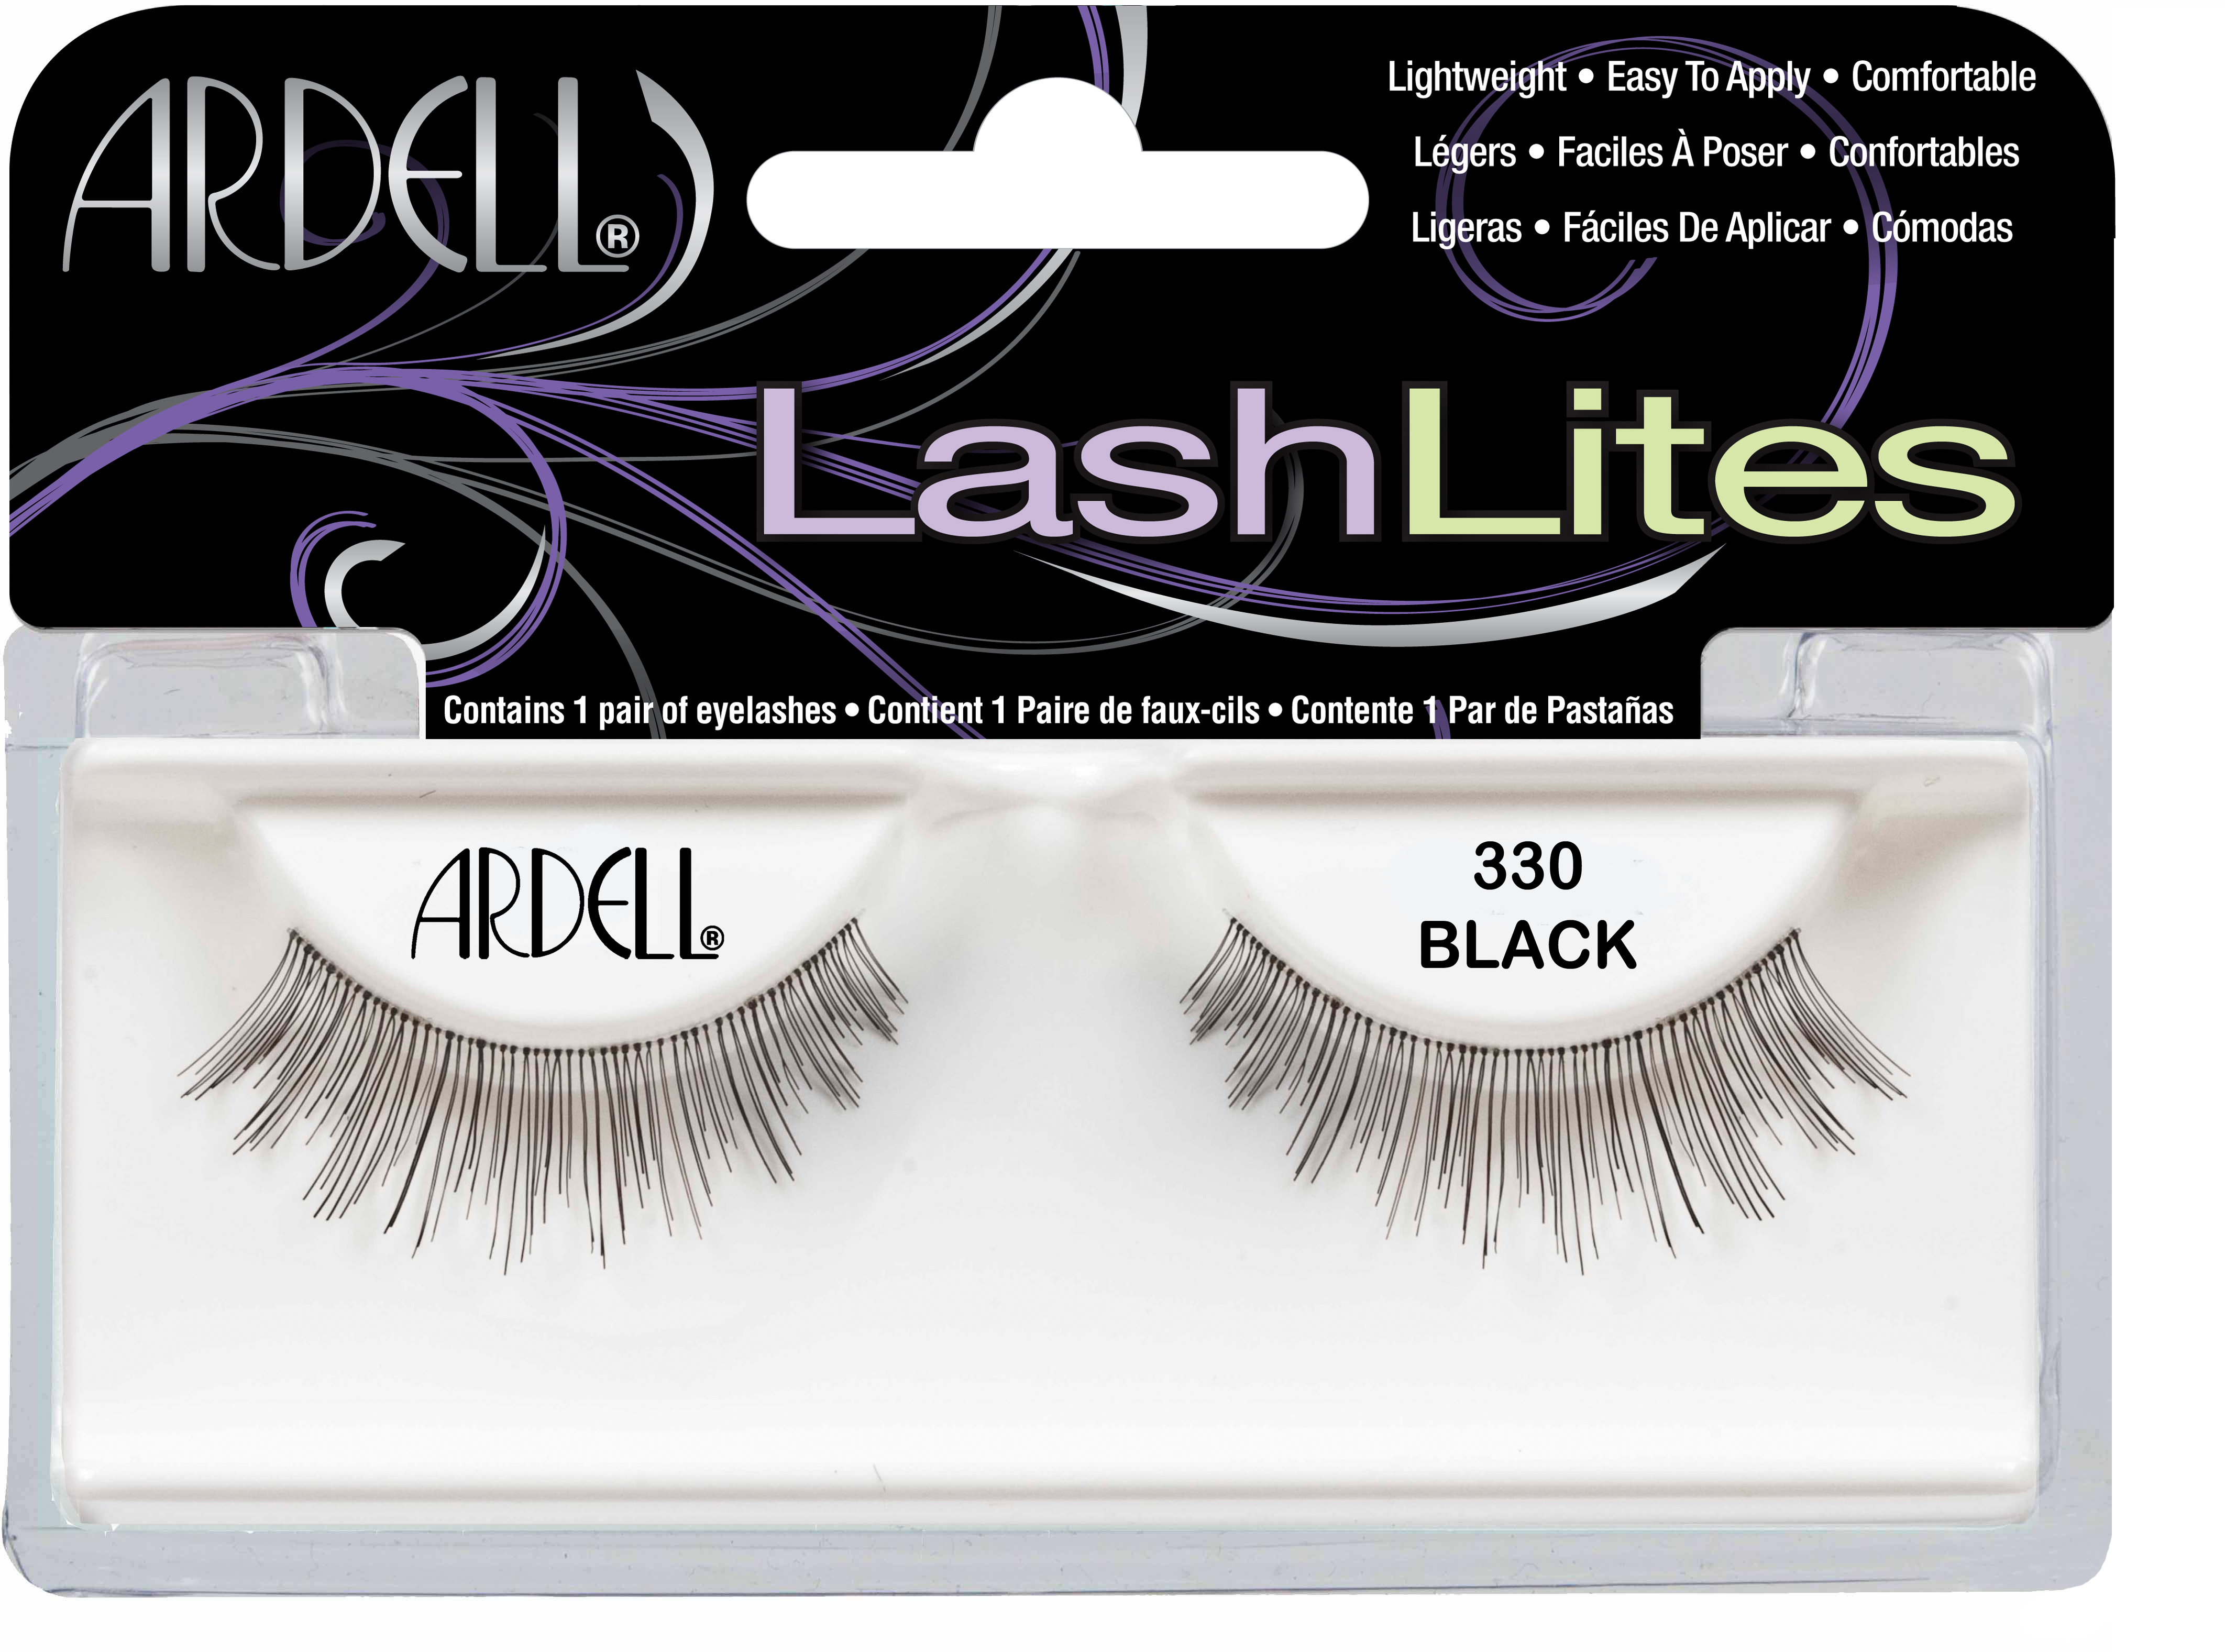 Ardell Lash Lites Most Natural Styles 330